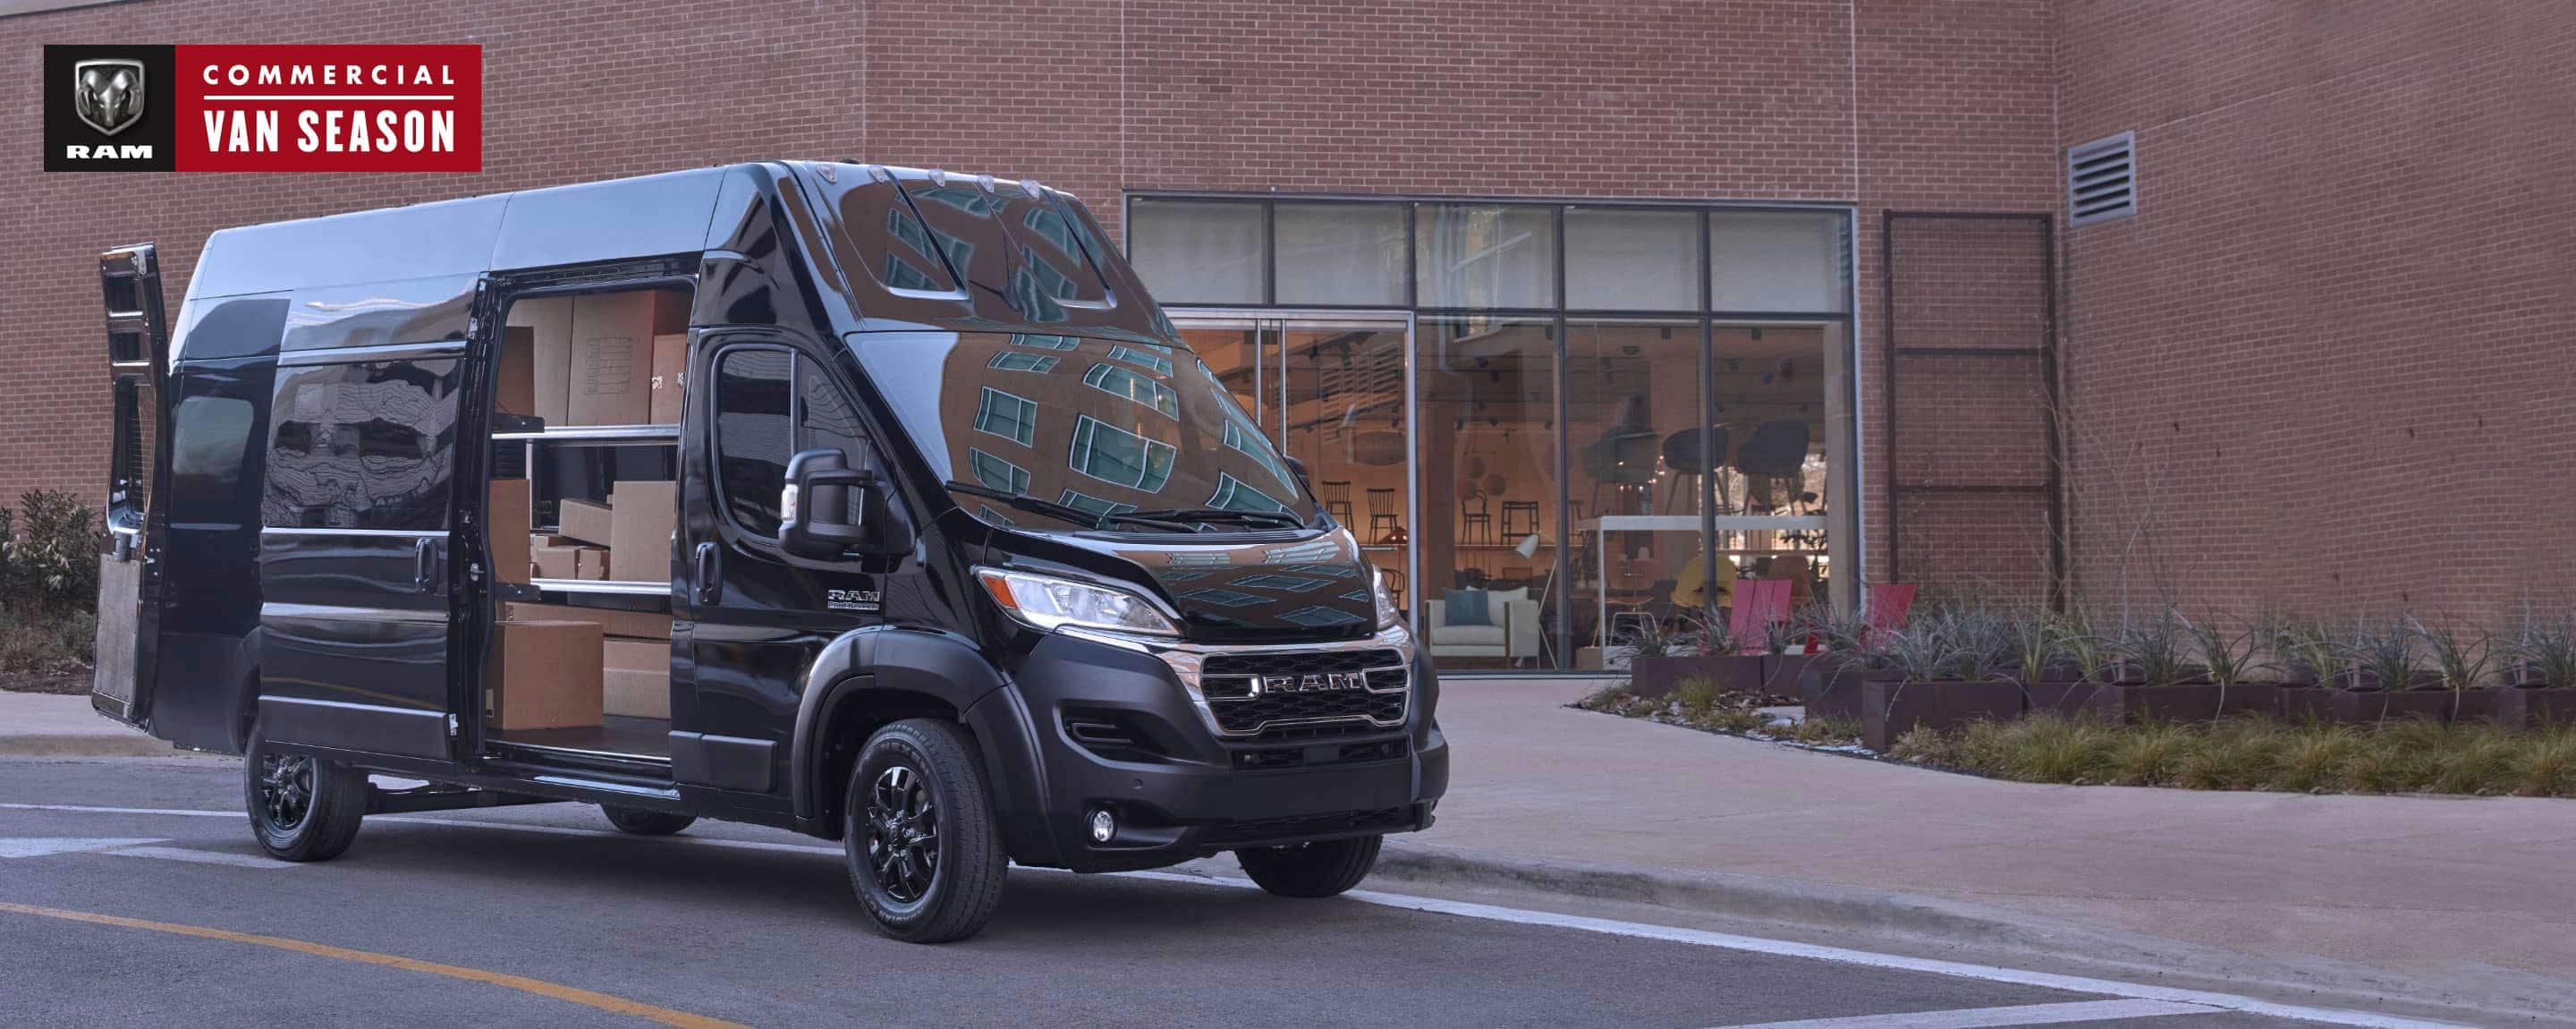 A 2023 Ram ProMaster 3500 Super High Roof Cargo Van parked next to a furniture store, its rear doors and passenger-side sliding door open, revealing shelves full of boxes. Ram Commercial Van Season.